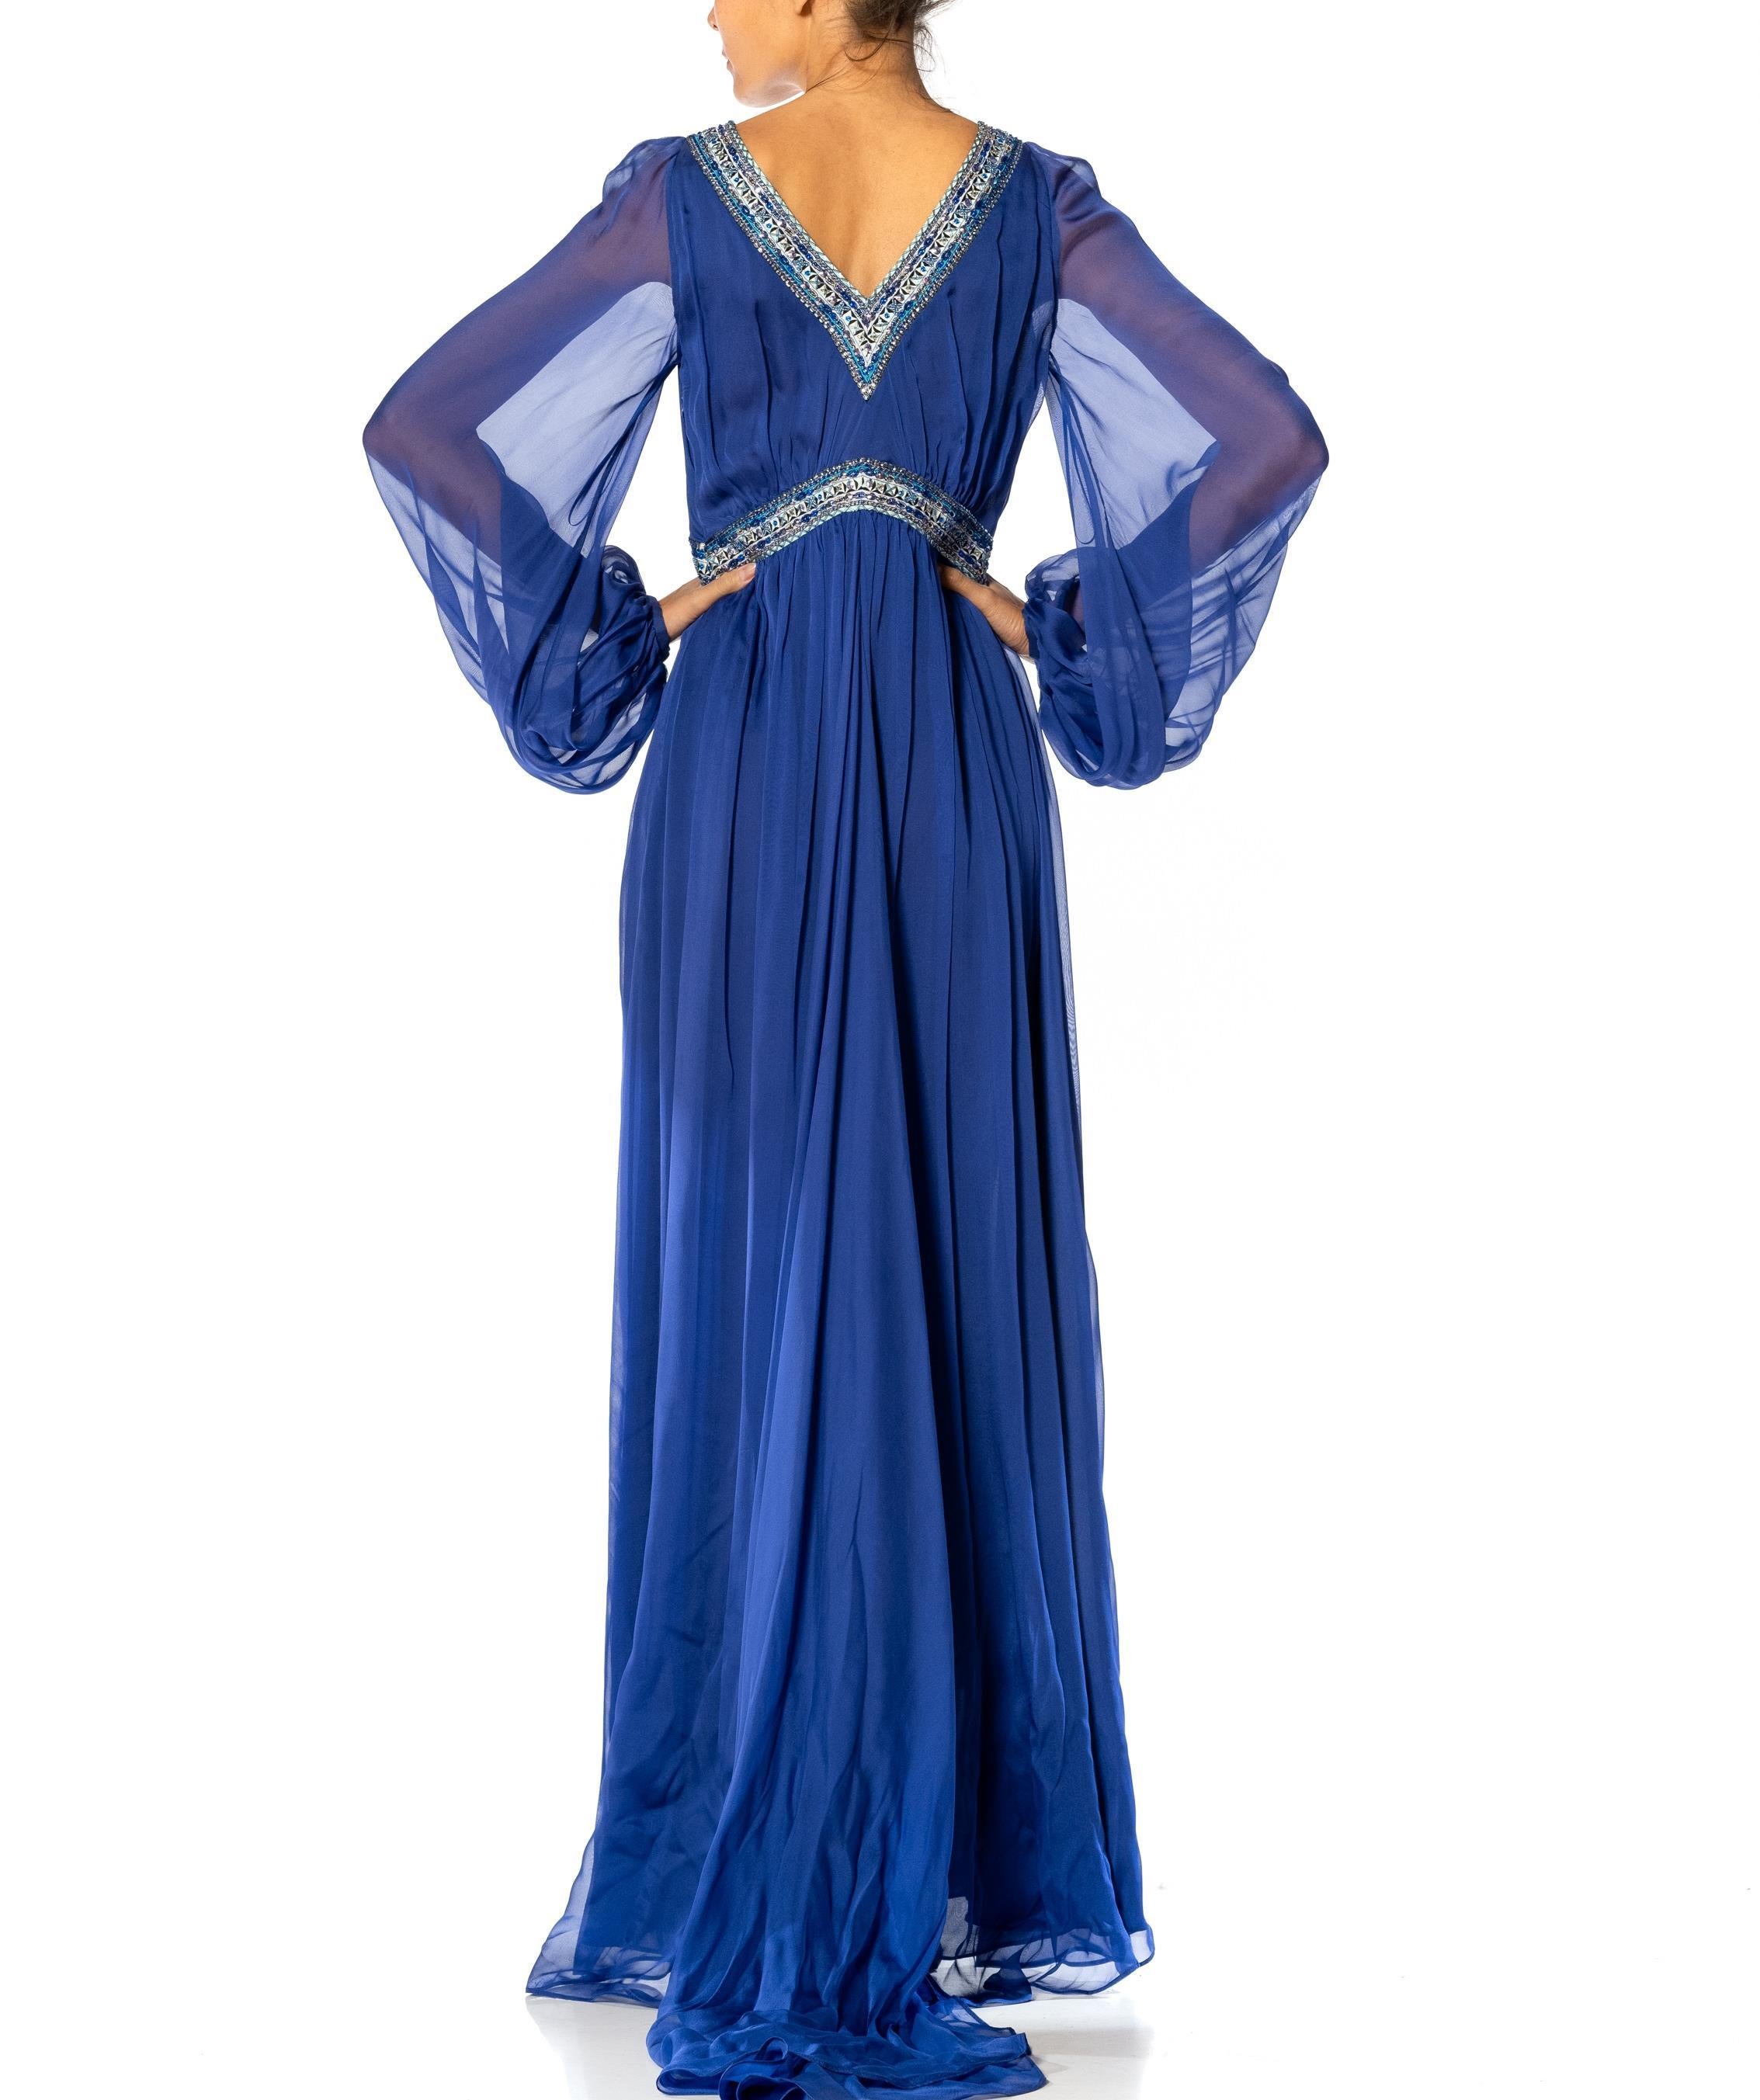 2000S EMILIO PUCCI Cobalt Blue Silk Chiffon Sleeved Gown With Beaded Print Deta For Sale 5